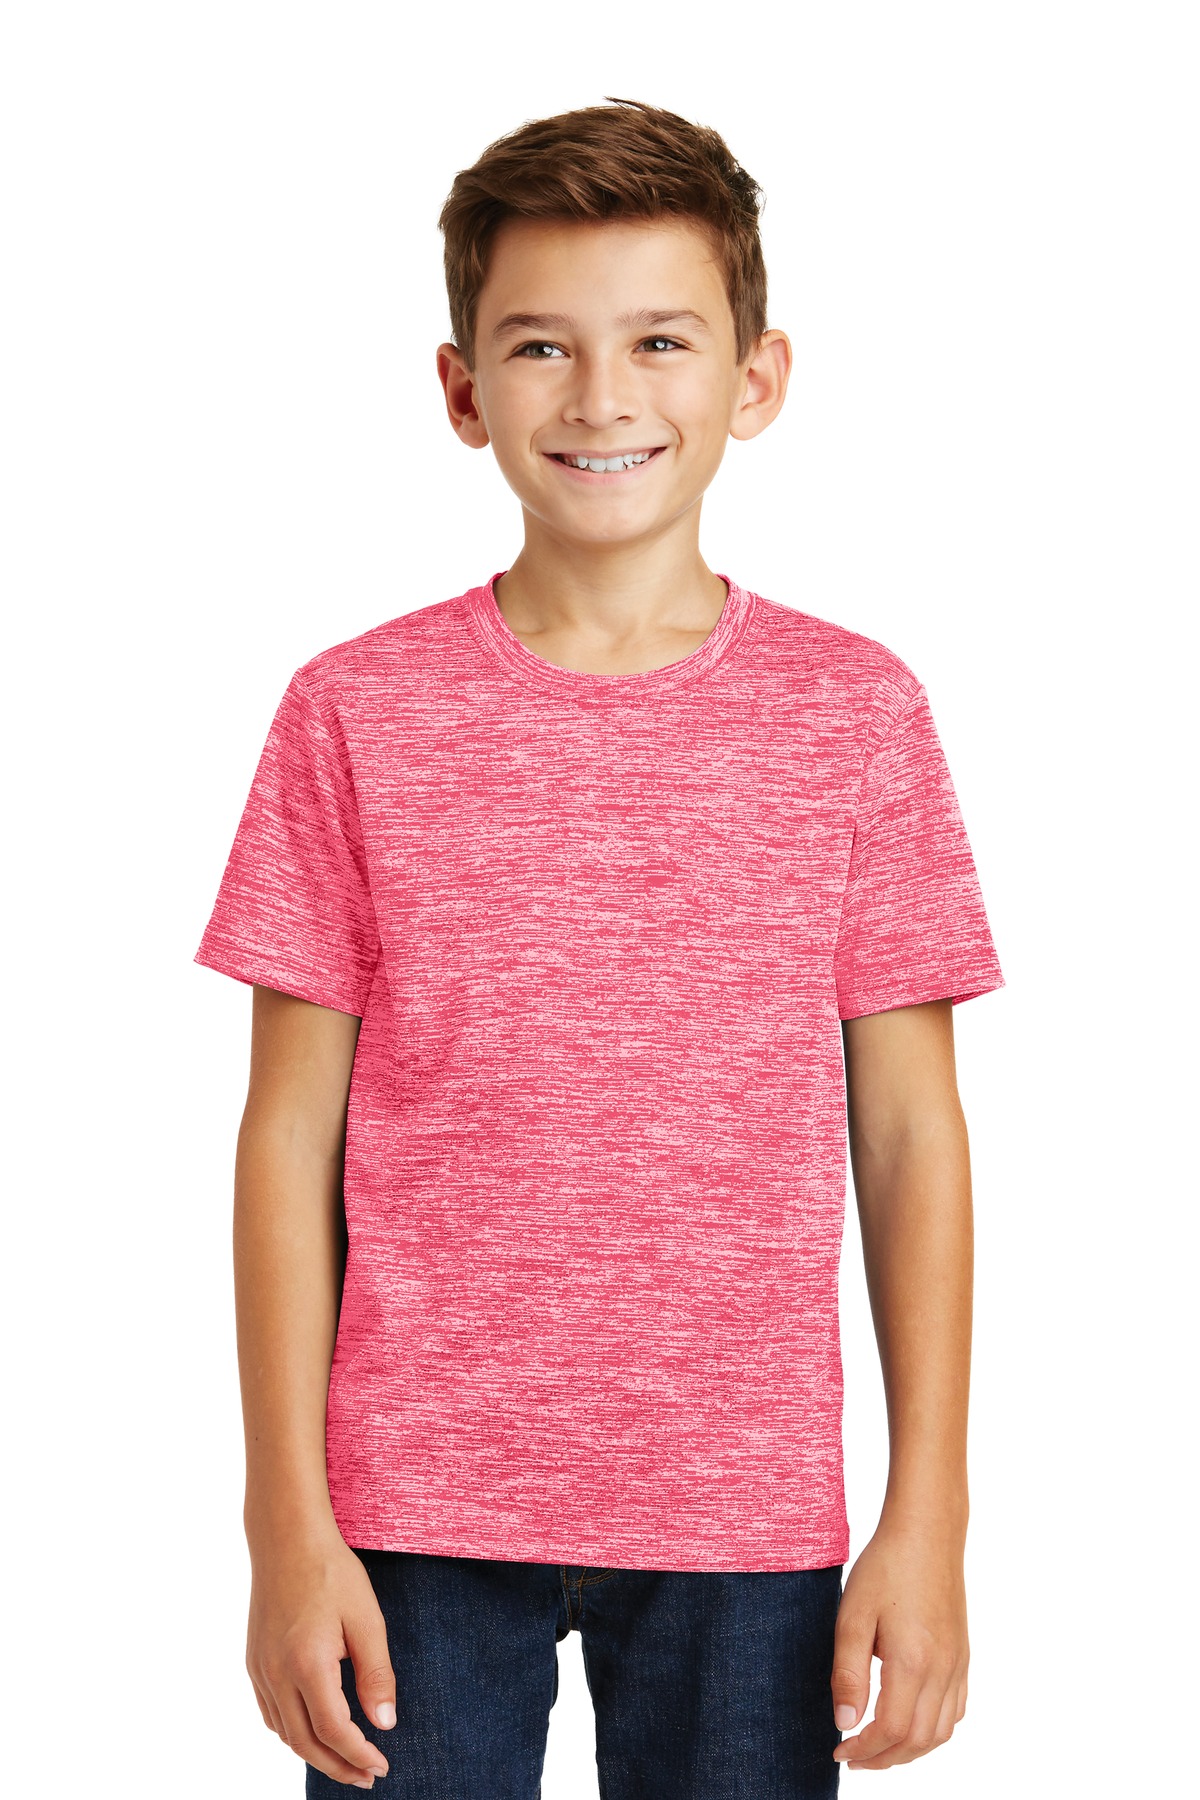 Sport-Tek Youth PosiCharge Electric Heather T-Shirt - YST390